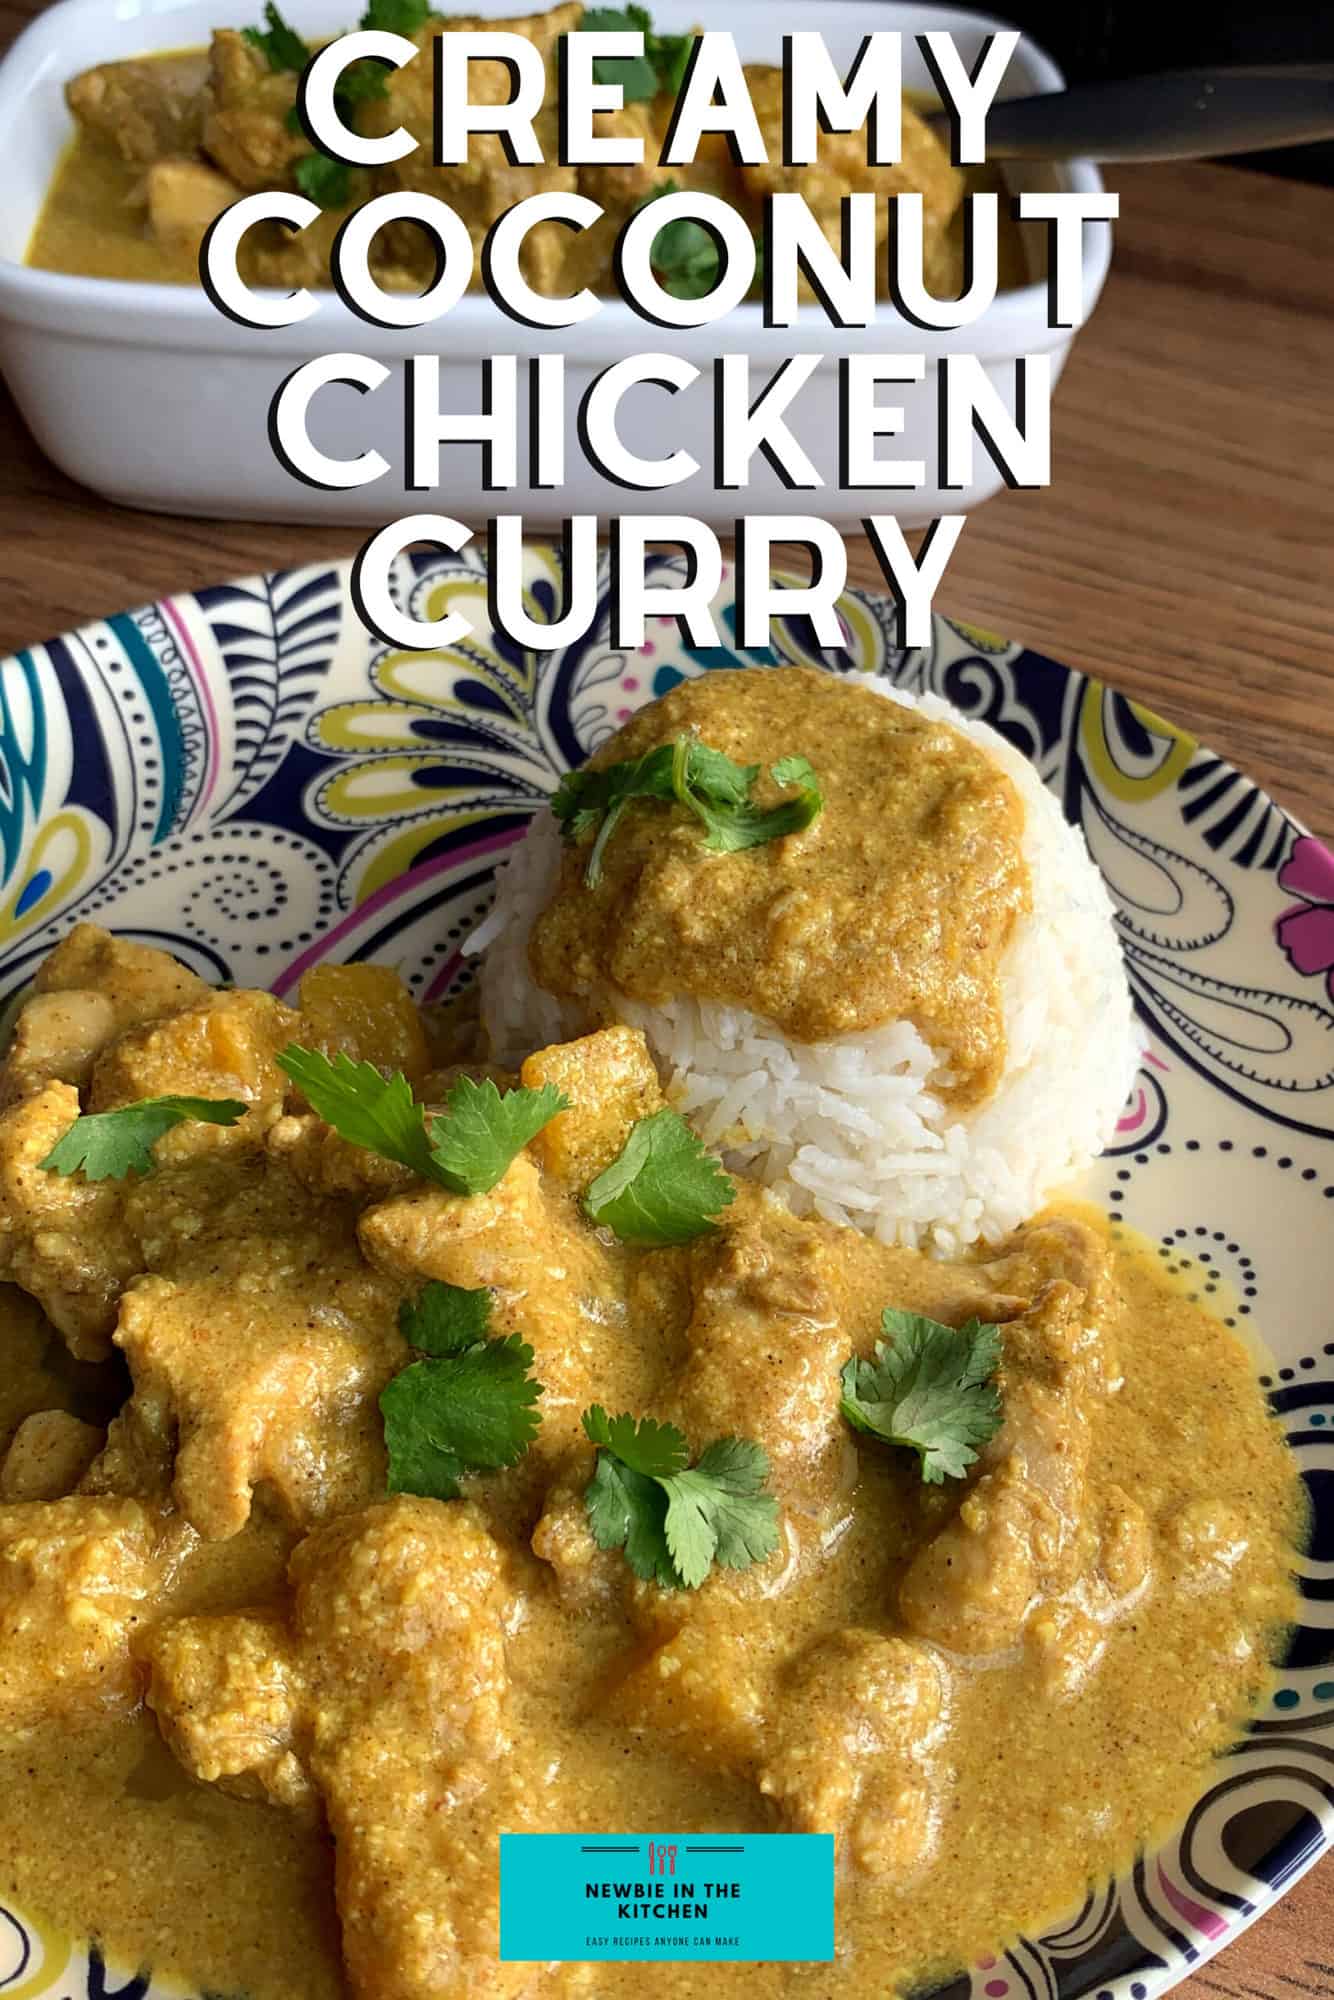 Creamy Coconut Chicken Curry.
A delicious mild spiced chicken curry recipe using creamy coconut and ground almonds to give a gentle sweet flavor. Takes under 30 minutes to make, using regular ingredients.